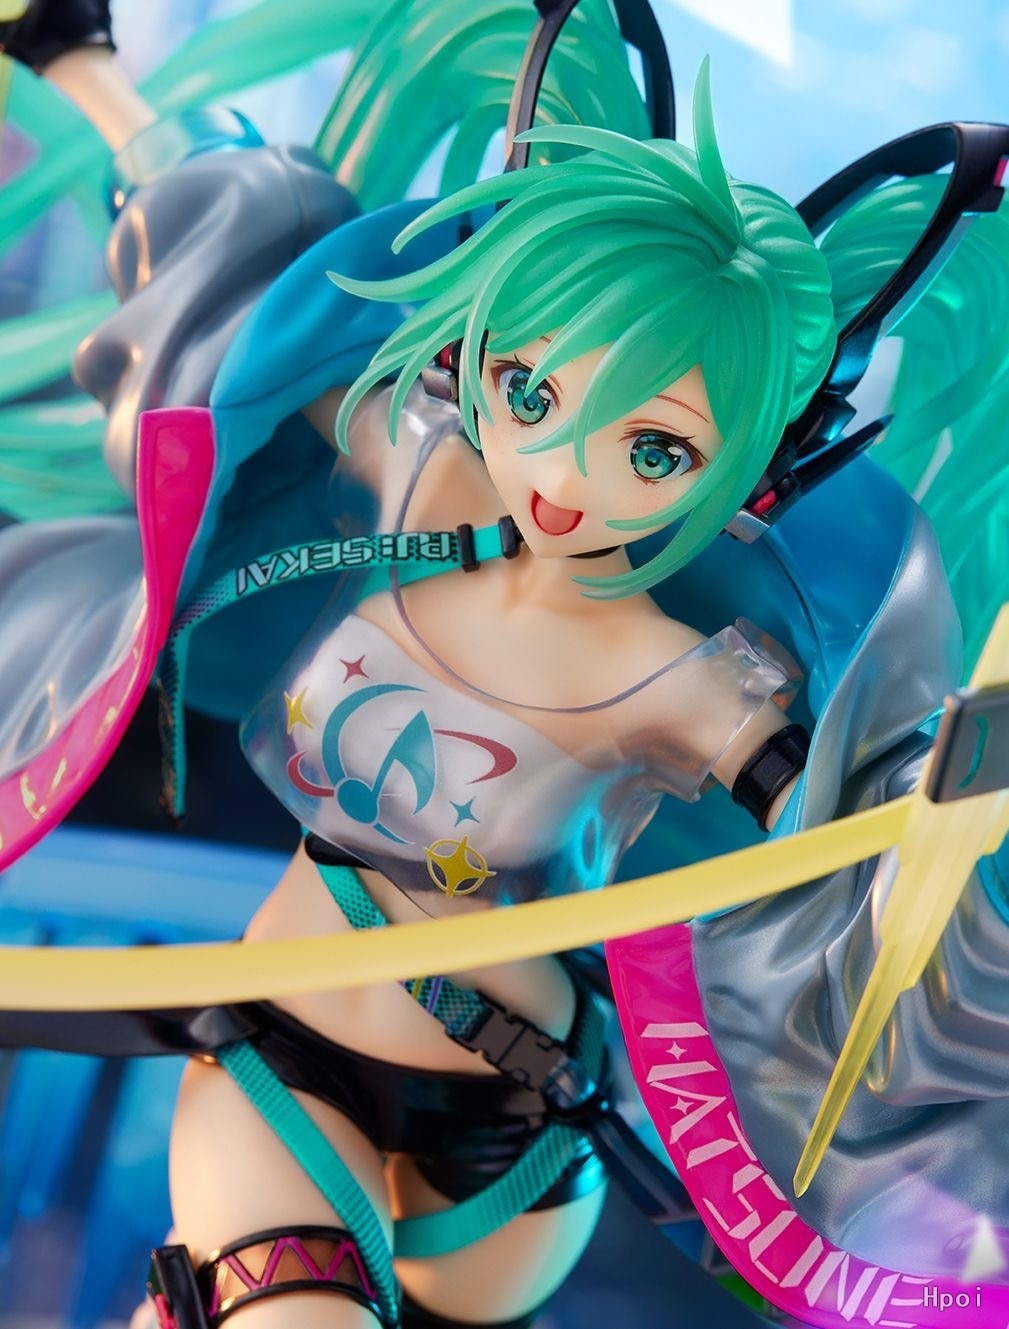 This figurine captures Miku in mid-performance & energy that has captivated millions worldwide. If you are looking for more Hatsune Miku Merch, We have it all! | Check out all our Anime Merch now!